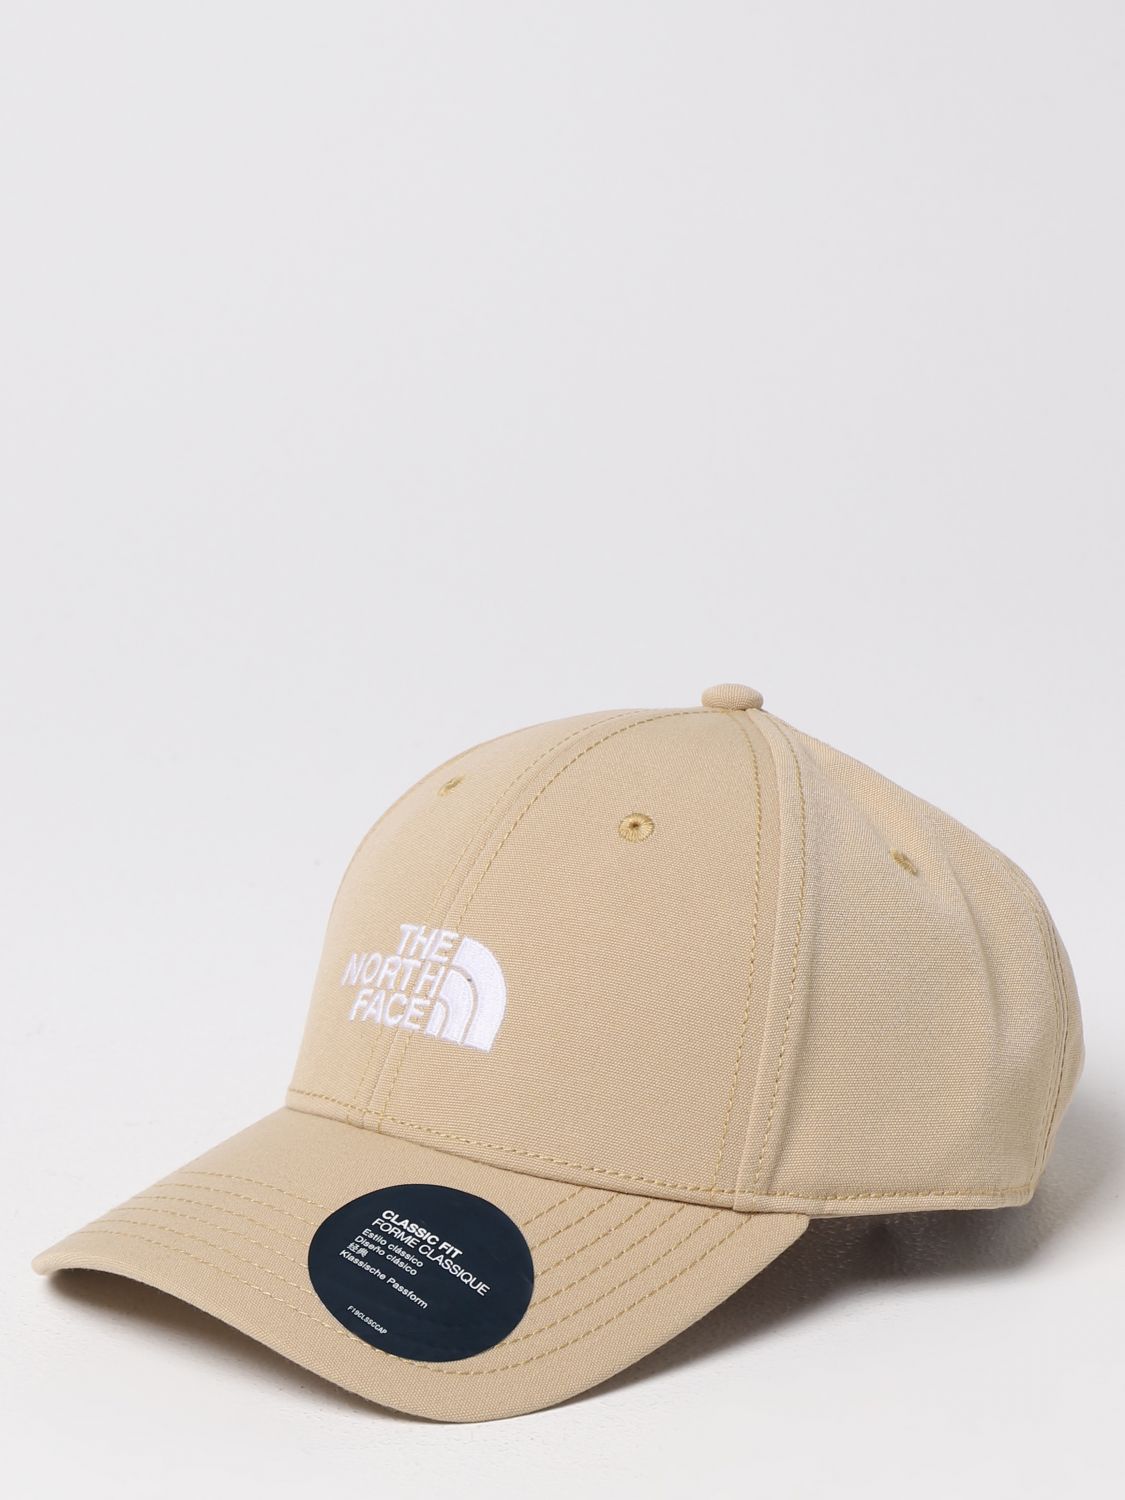 THE NORTH FACE: hat for man - Kaki | The North Face hat NF0A4VSV online ...